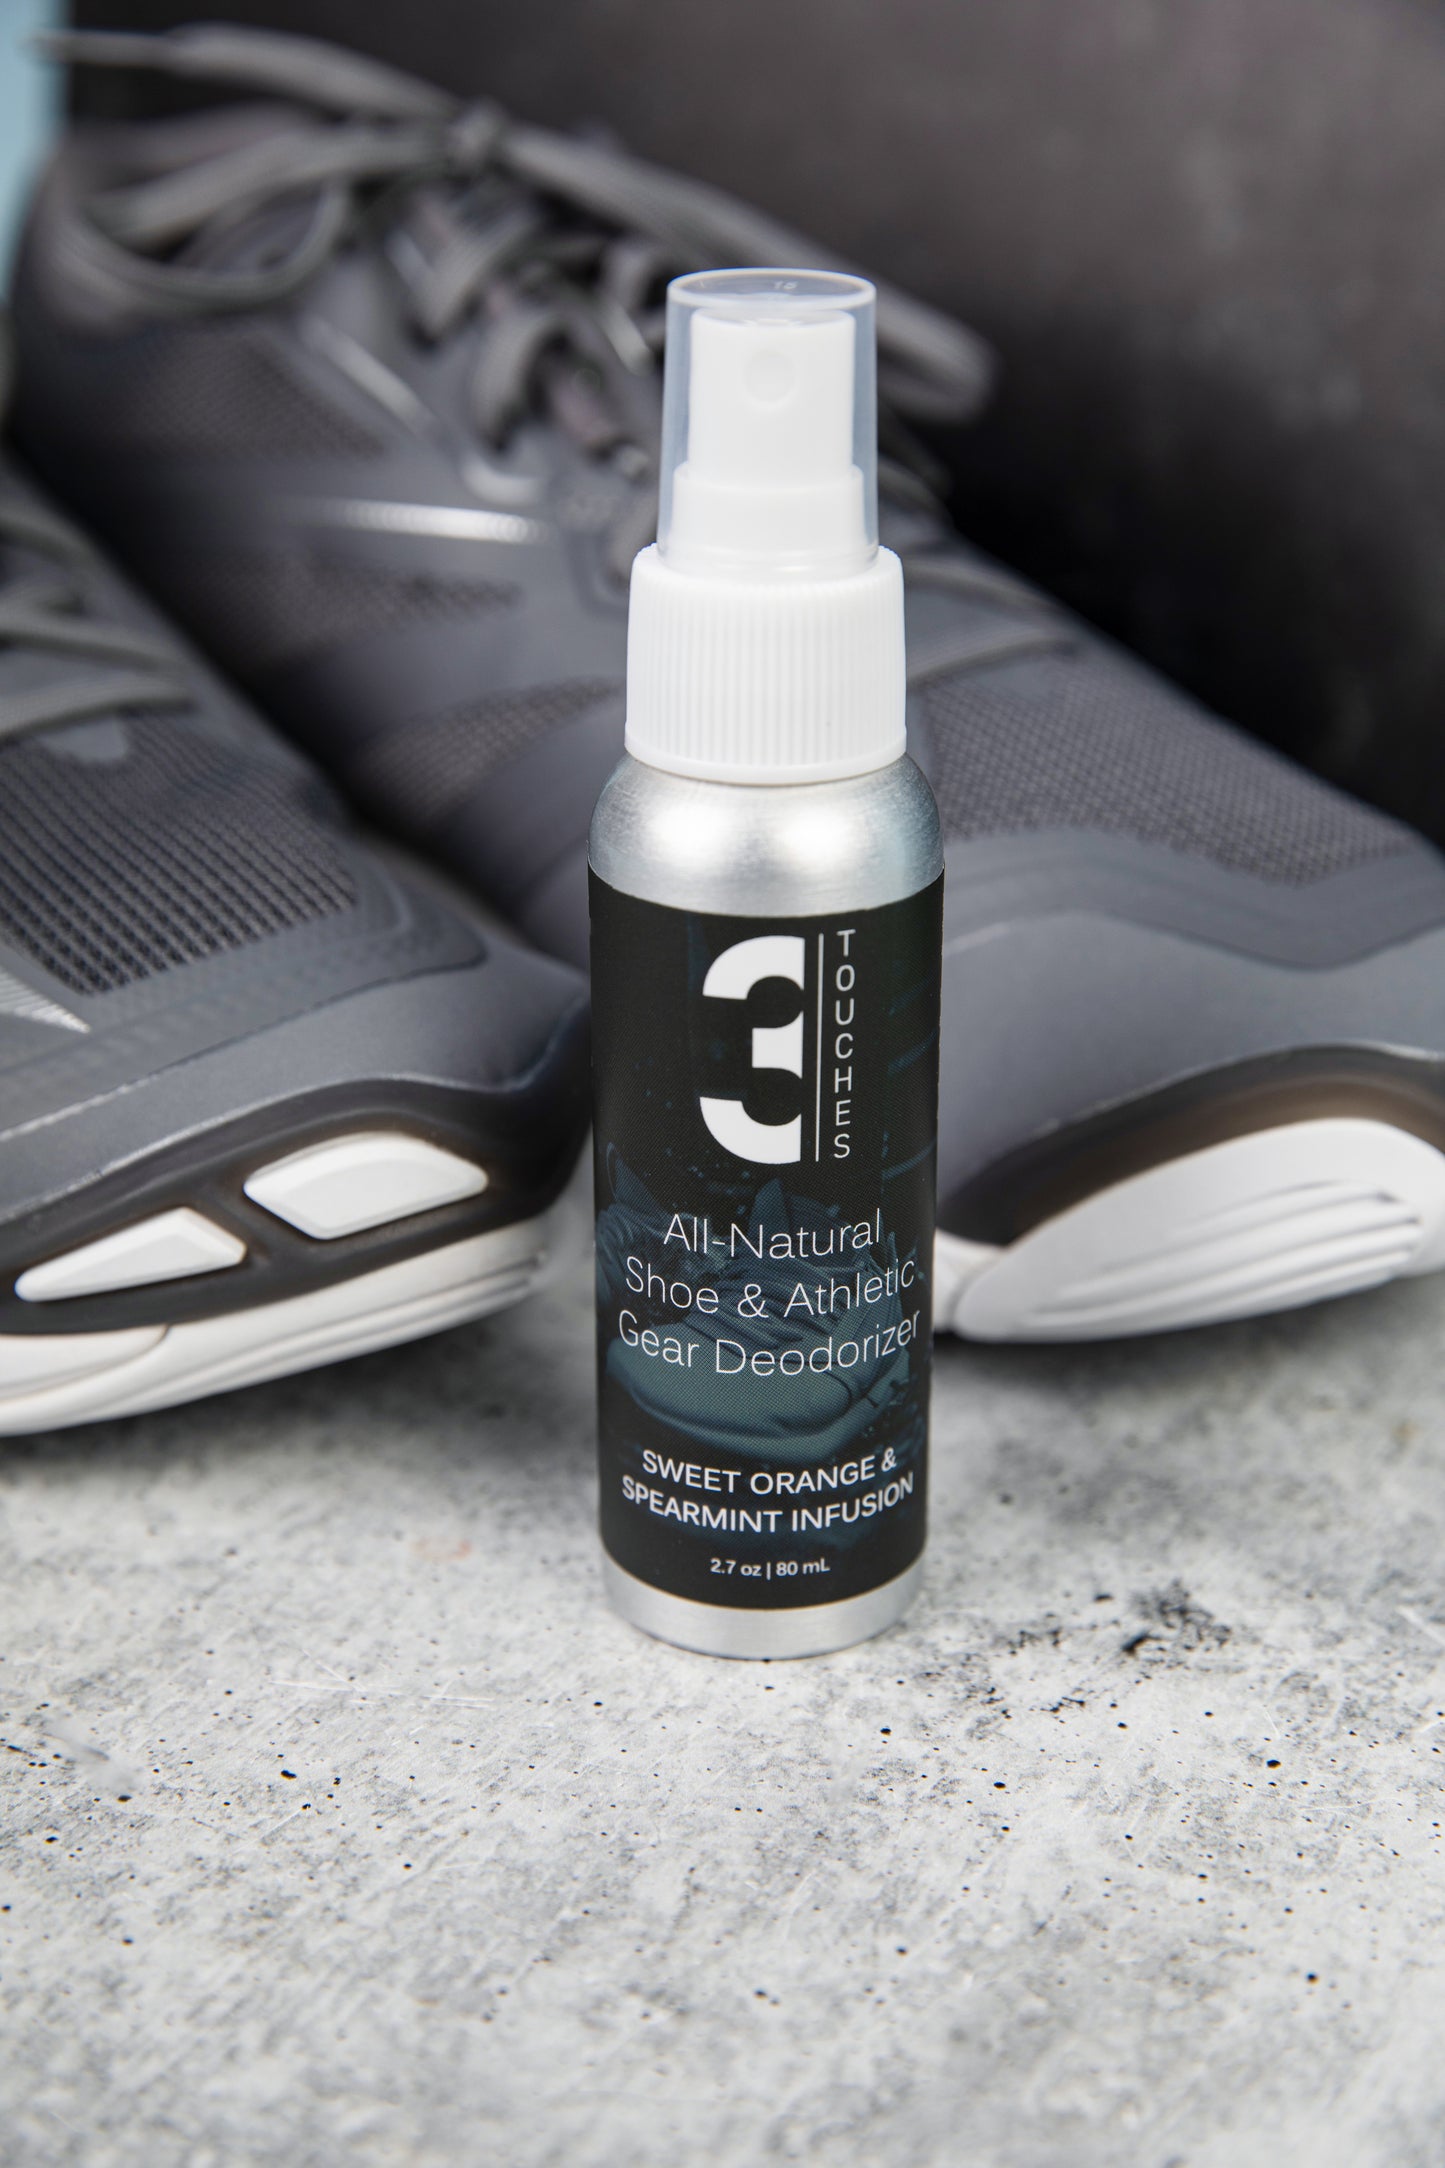 MADE FOR ATHLETES! - All Natural, Essential-Oil Based Shoe & Athletic Gear Deodorizer